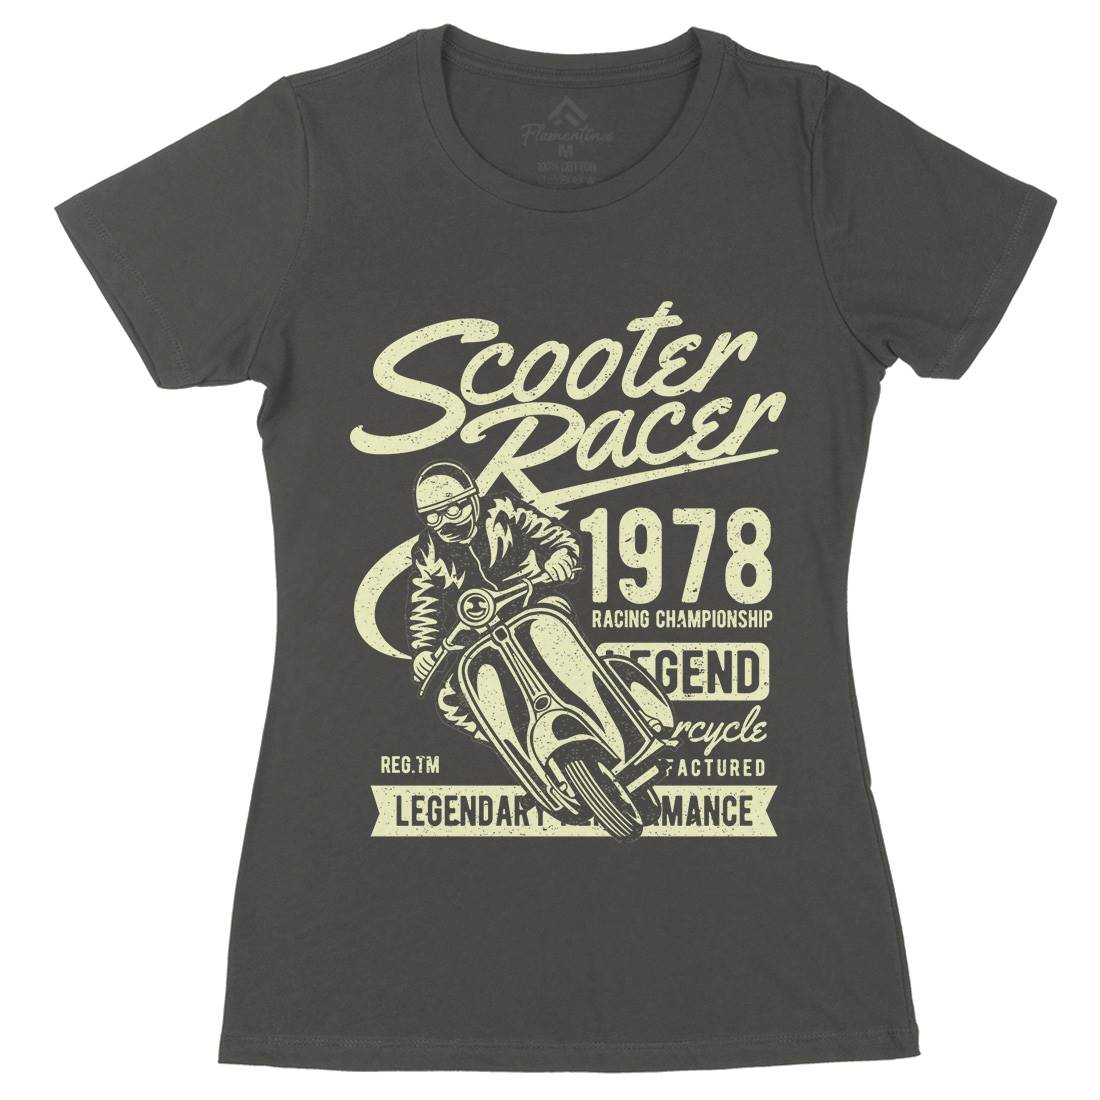 Scooter Racer Womens Organic Crew Neck T-Shirt Motorcycles A136